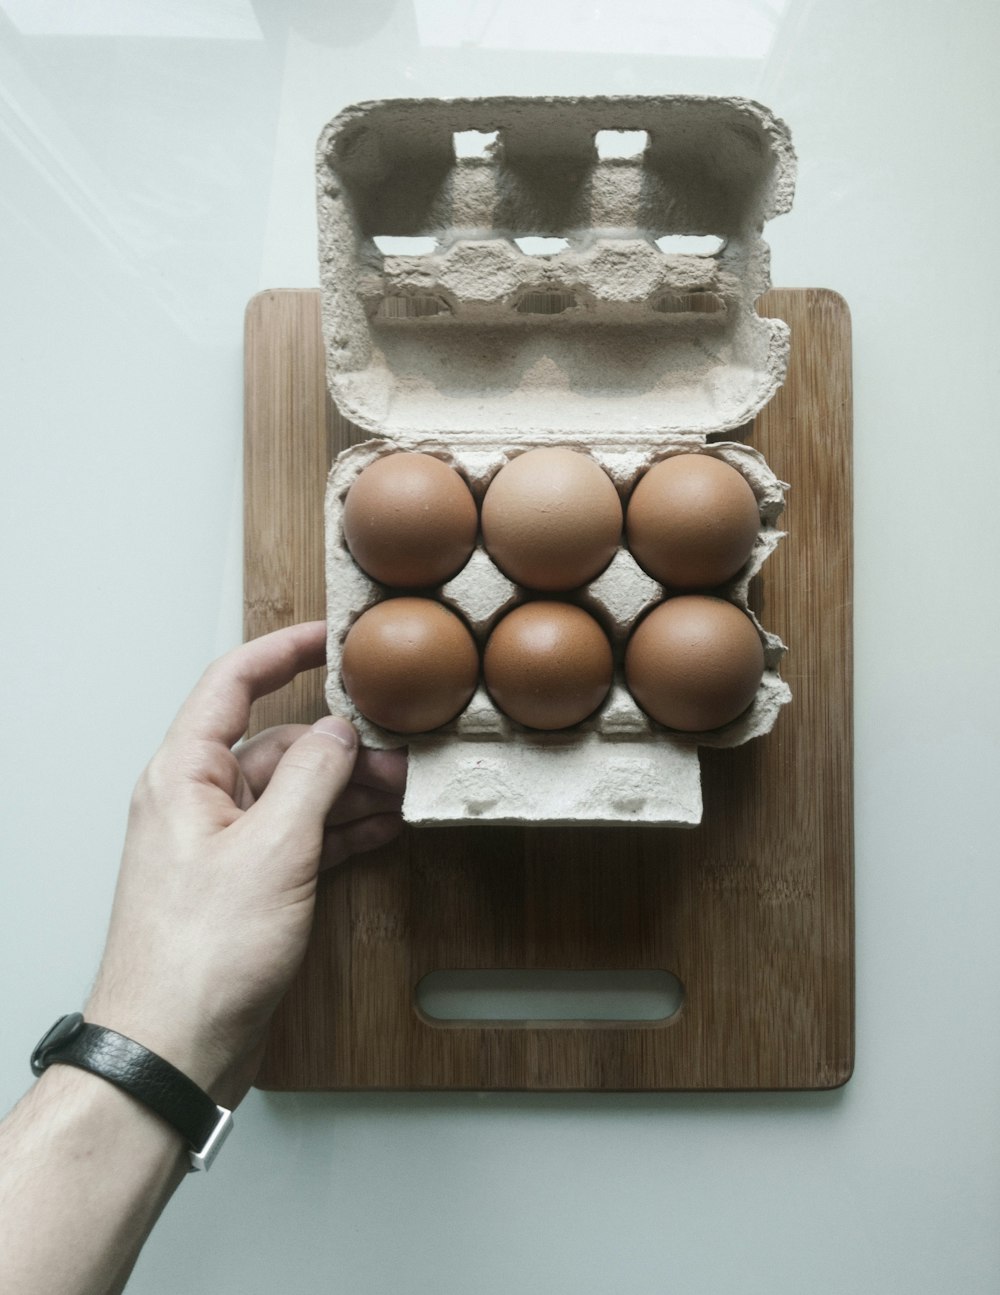 a person is holding a carton of eggs